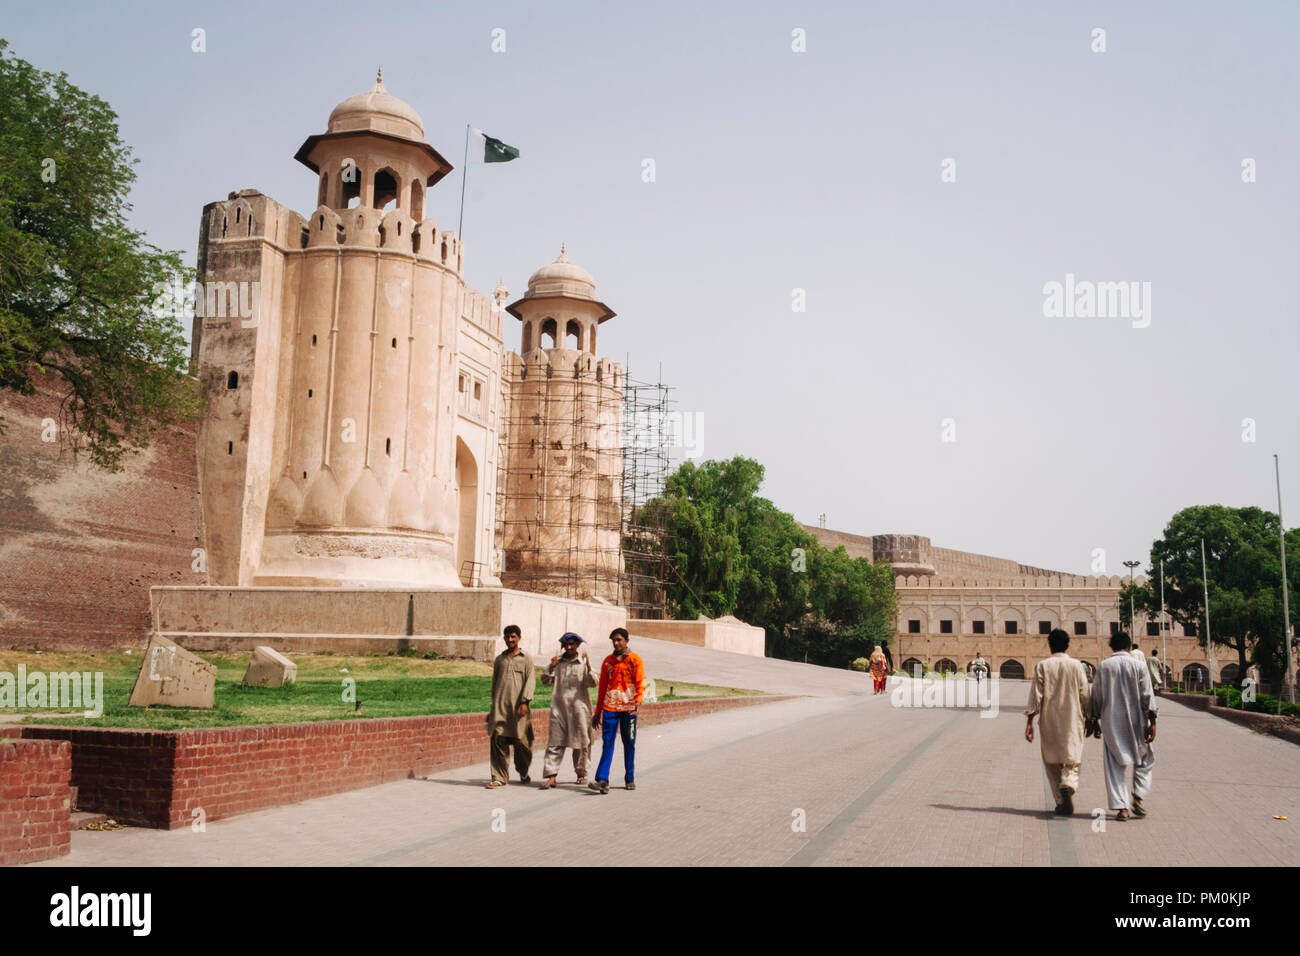 Lahore, Punjab, Pakistan, South Asia : People walk past the colossal Alamgiri Gate of the Shahi Qila or Lahore Fort, built in 1674 during the reign of Stock Photo